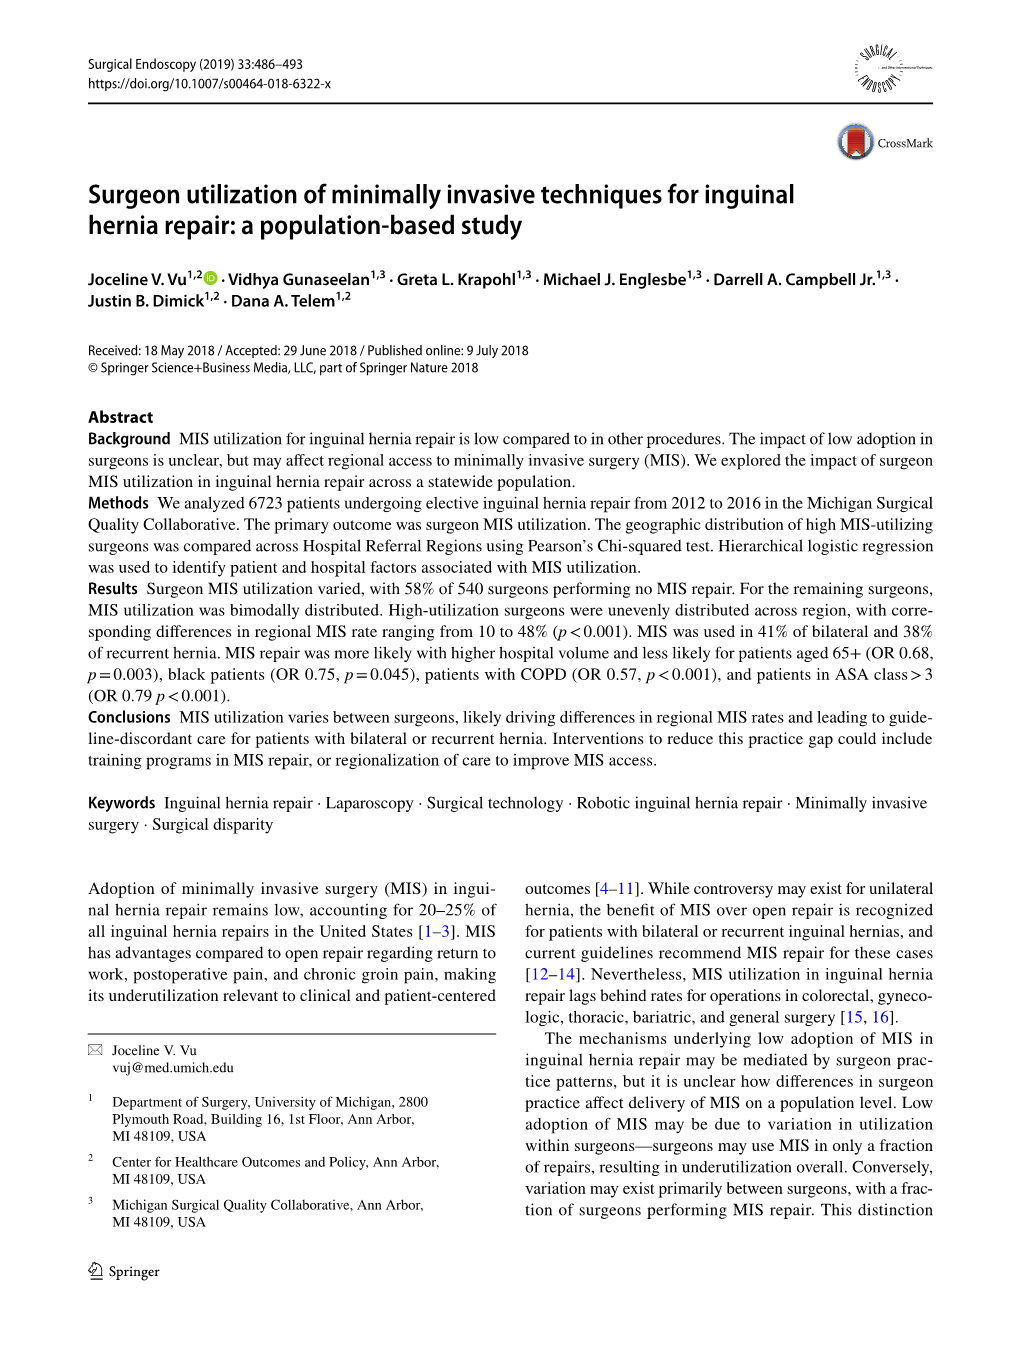 Surgeon Utilization of Minimally Invasive Techniques for Inguinal Hernia Repair: a Population-Based Study